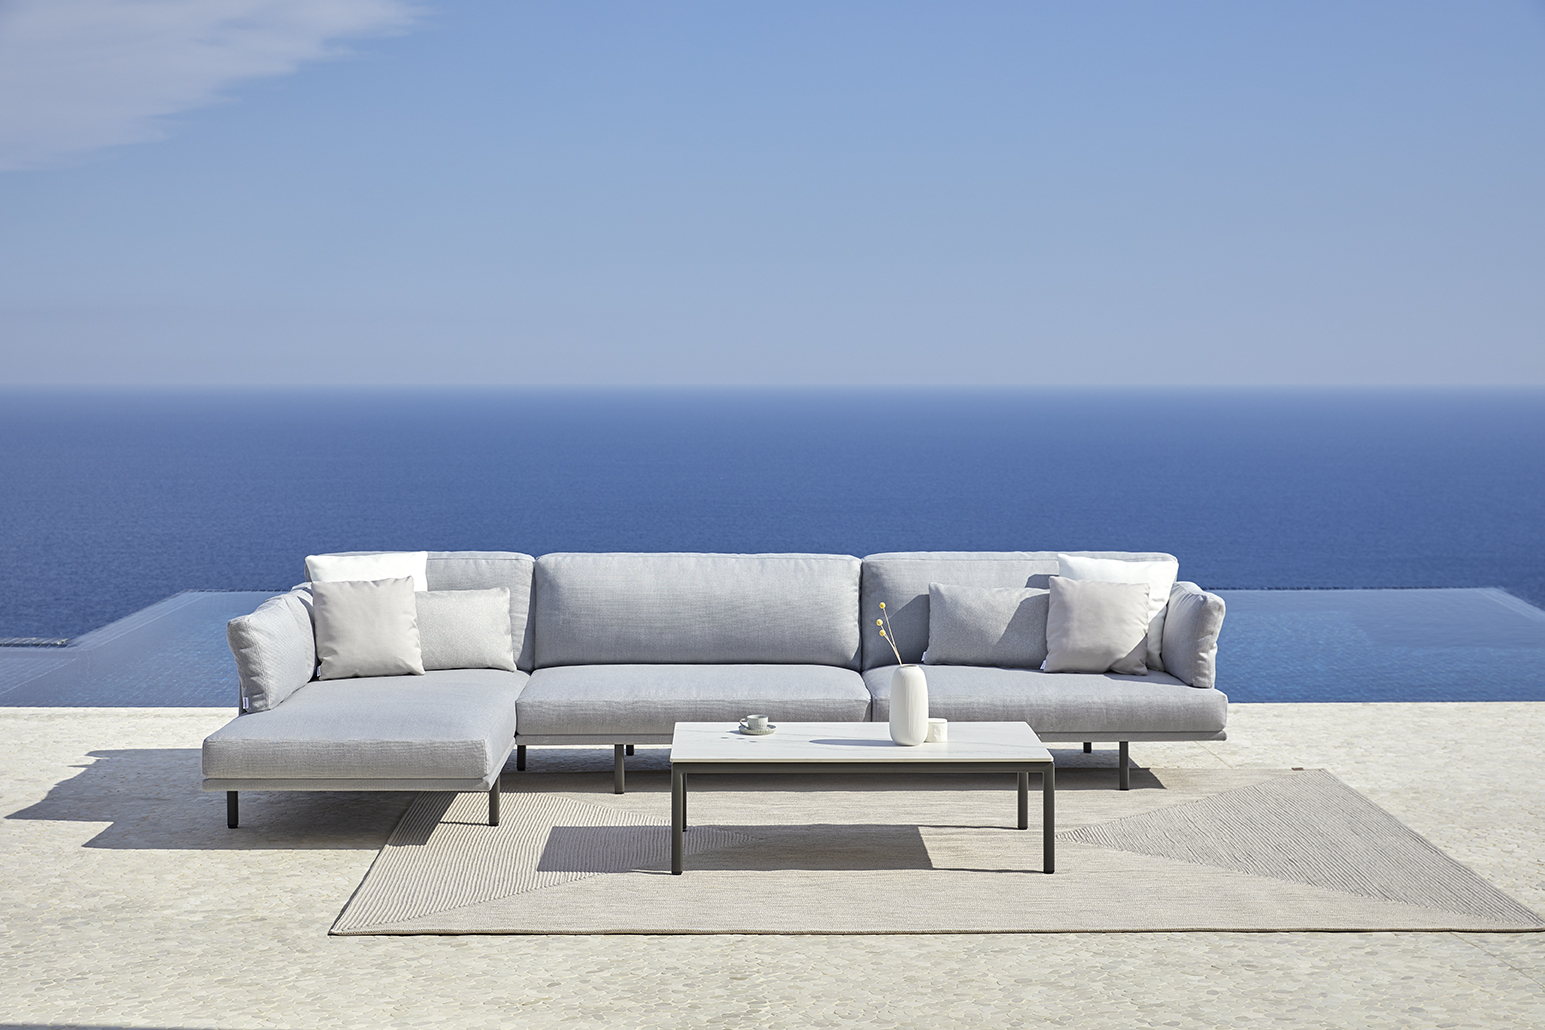 outdoor sofa upholstered in neutral tones from the Longisland collection